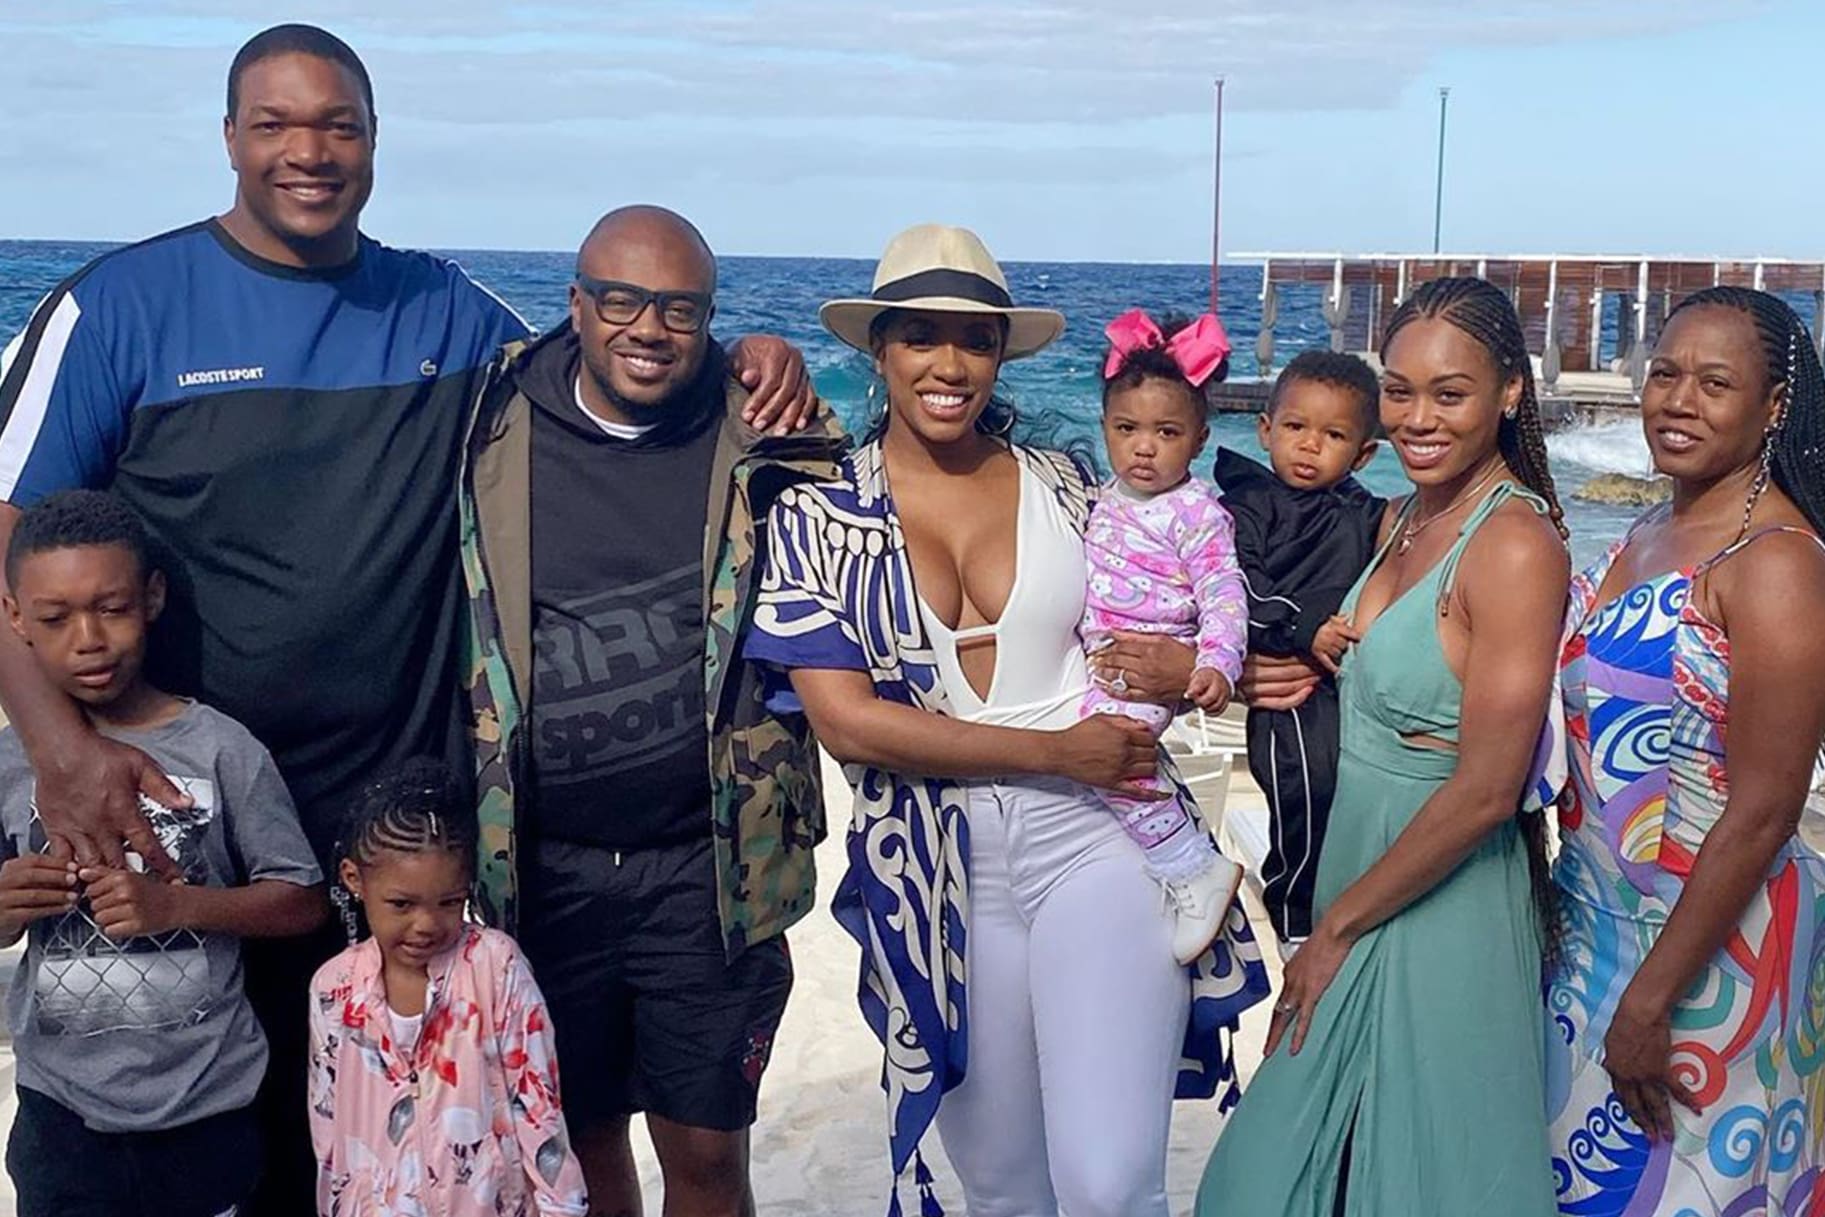 Porsha Williams Discusses Growing Up In A Civil Rights Family - Fans Says That Baby Porsha Is Twinning With Pilar Jhena